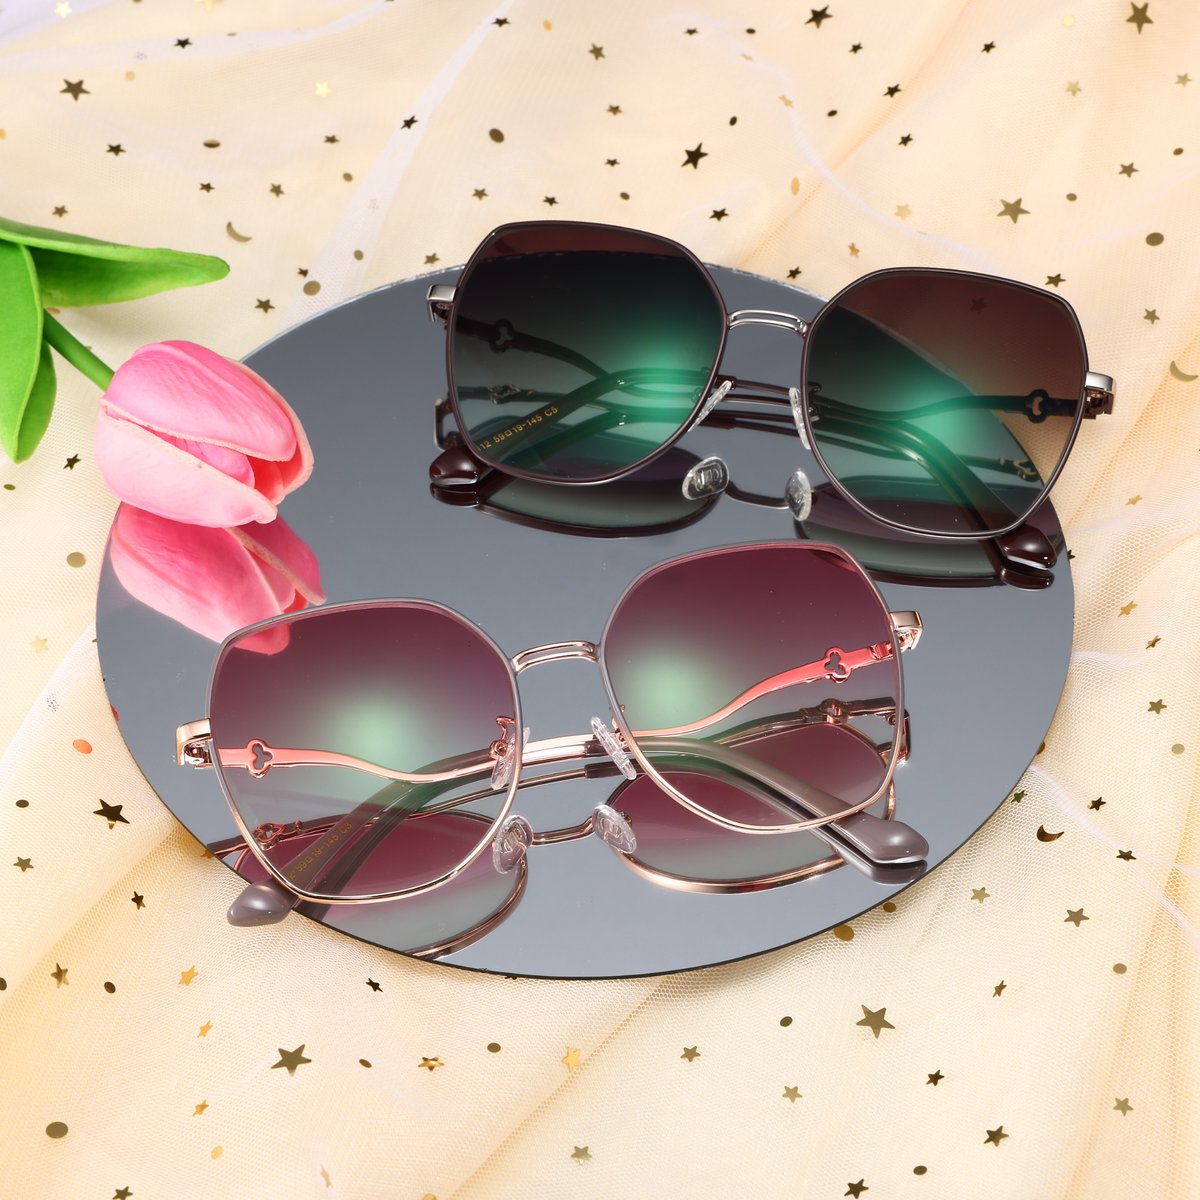 Summer getaway essentials! 😎☀️ They say sunglasses can make or break your vacation style! Which style would you pick? 🏖️

1️⃣: #S67826 💰$39 #topseller
2️⃣: #S29016 💰$39
👉 Use code TW to get 50% off all frames!